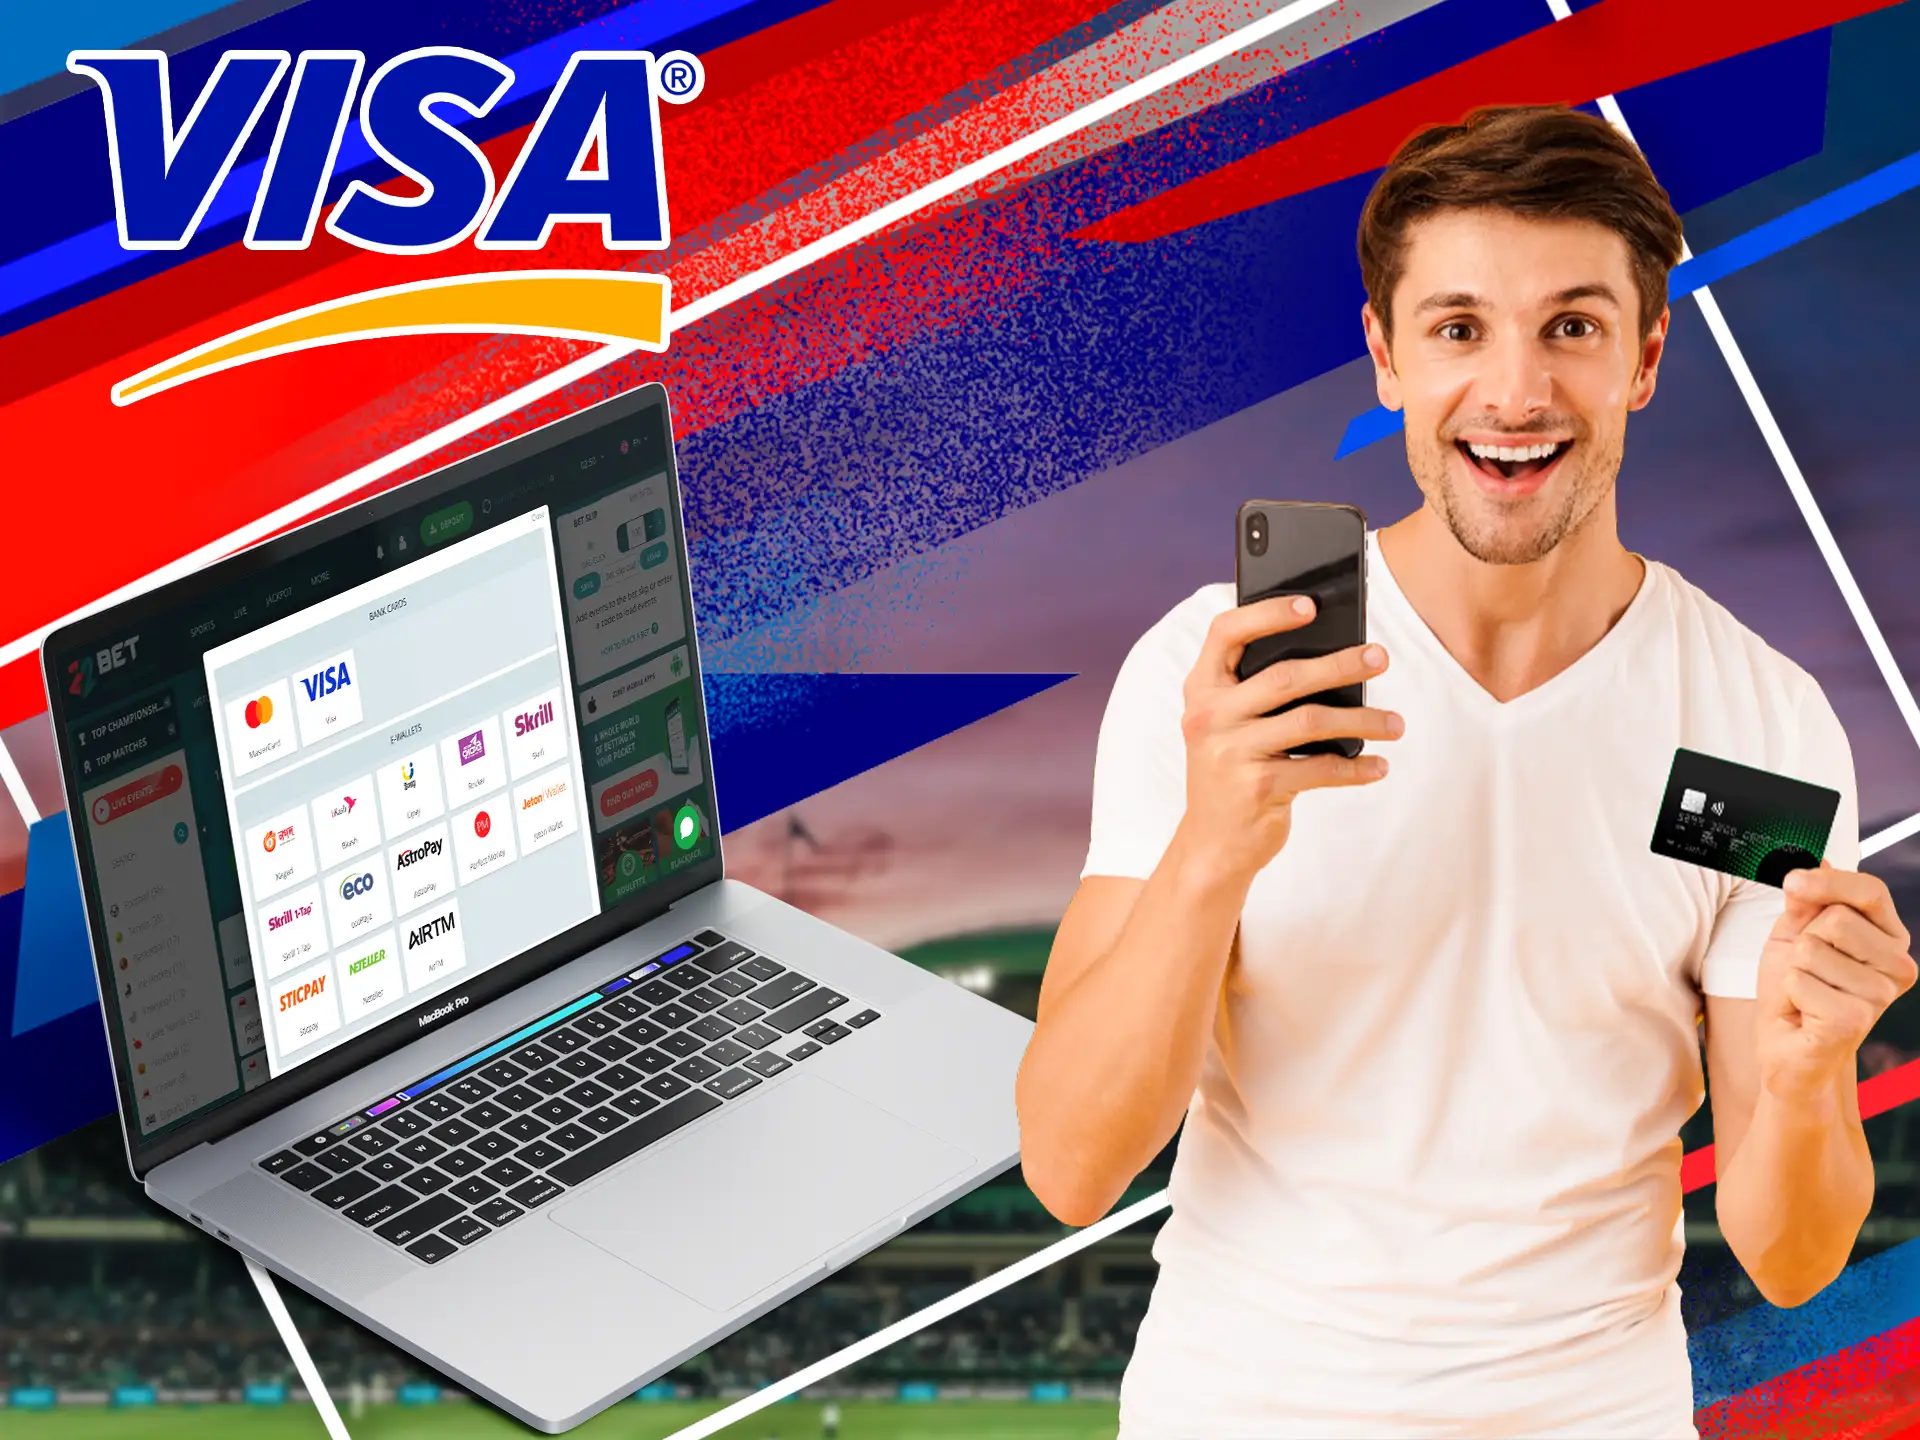 Almost all modern betting sites accept payment using the visa payment system, it is completely secure and controlled by the bank.